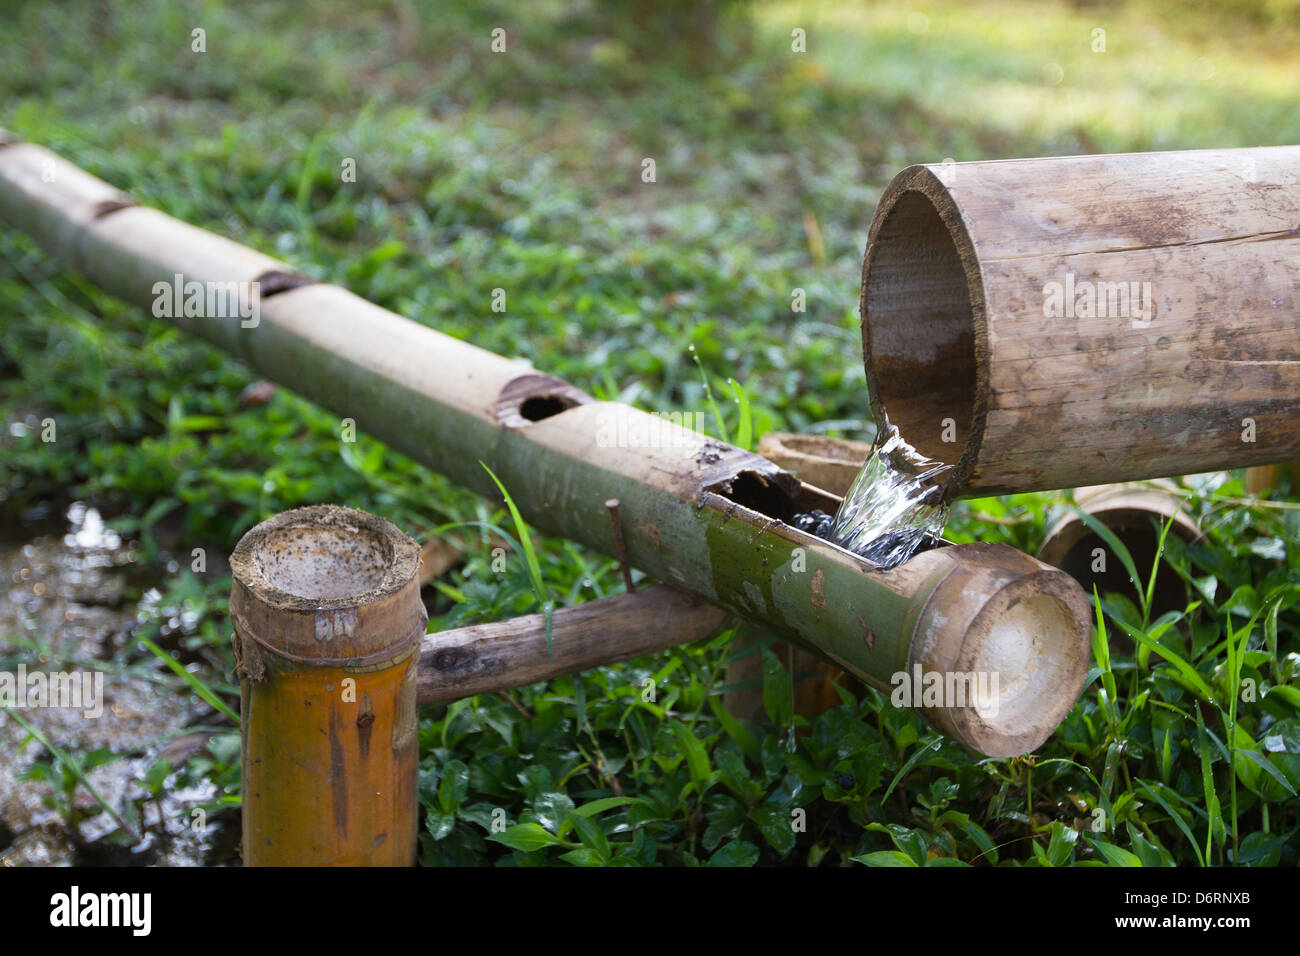 bamboo ecological watering system Stock Photo